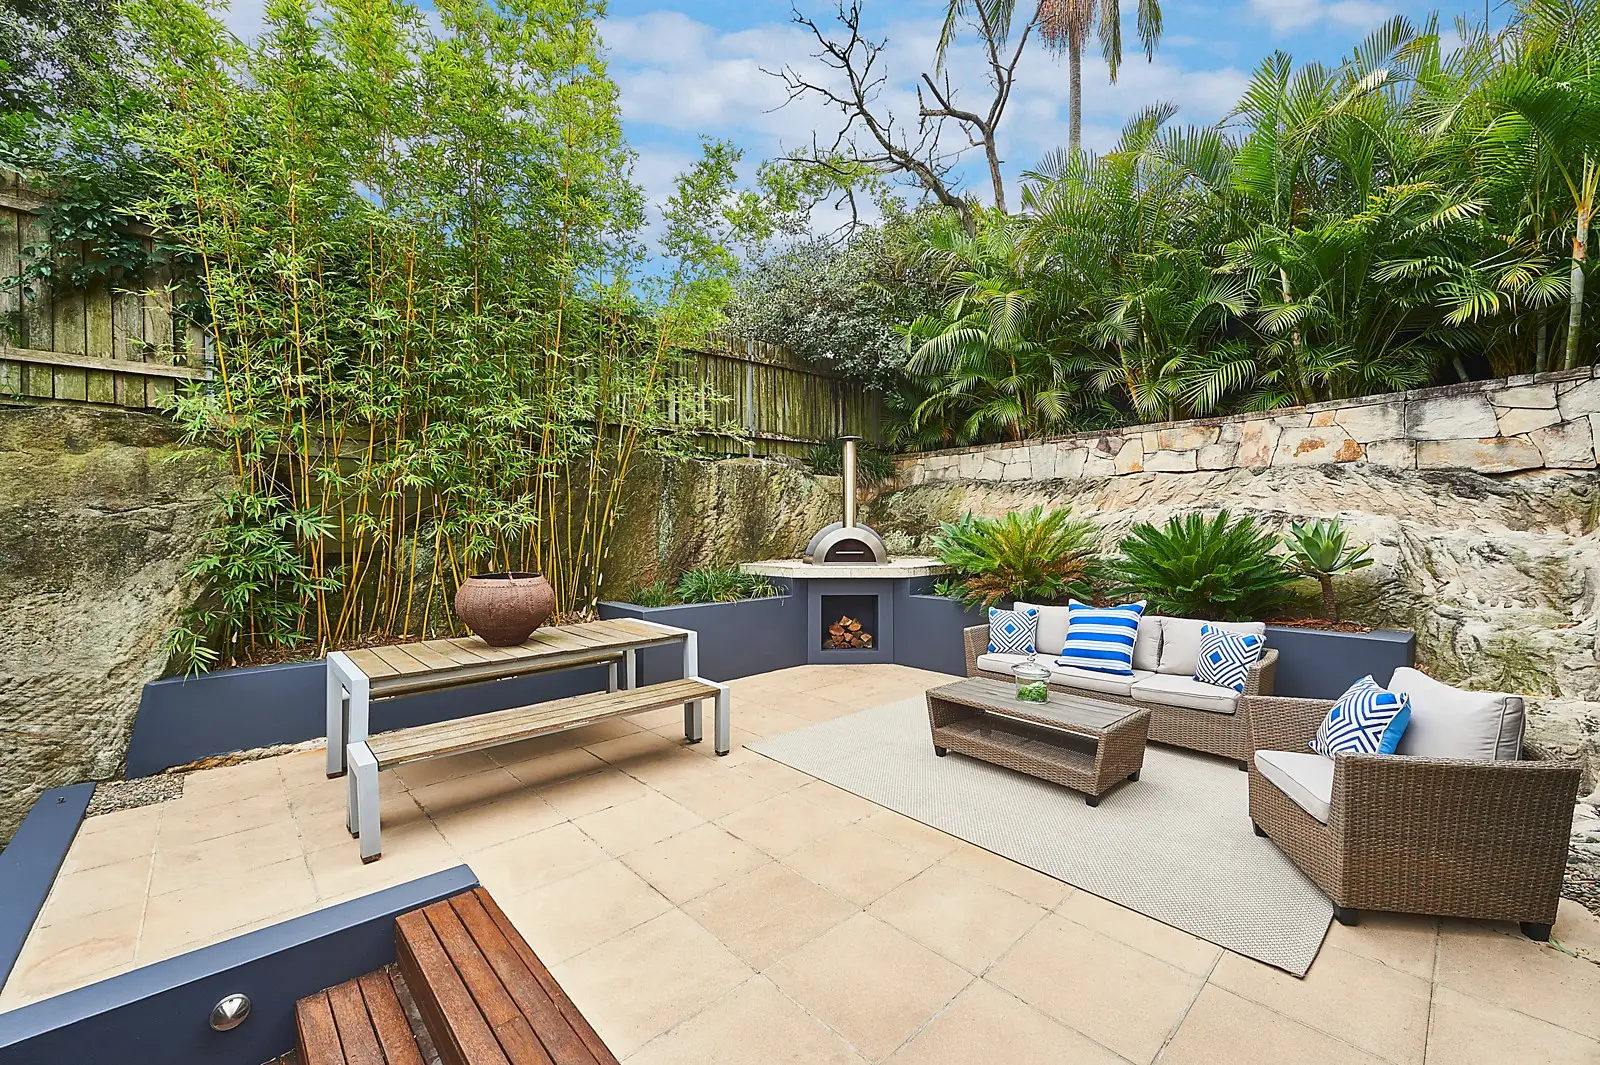 Photo #2: 21A Holdsworth Street, Neutral Bay - Sold by Sydney Sotheby's International Realty